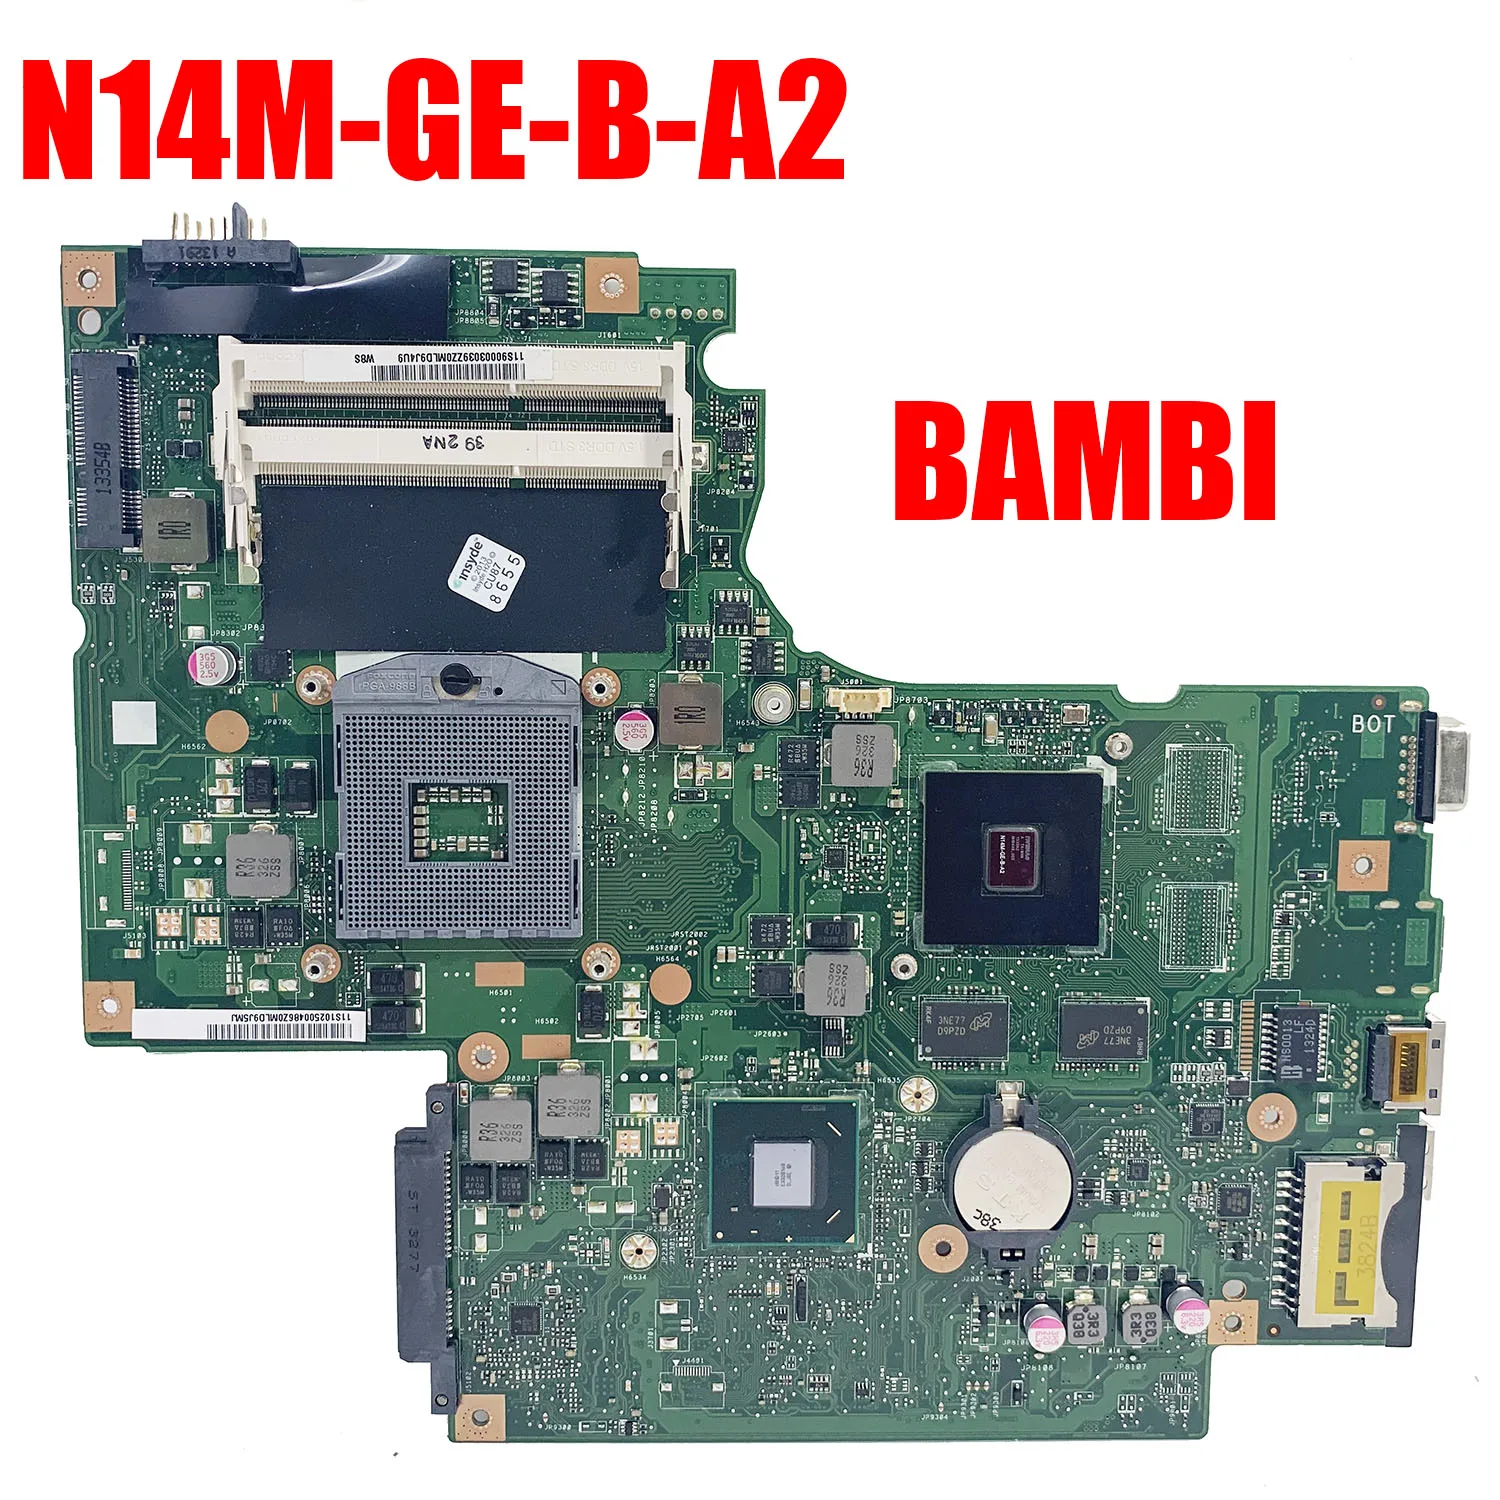 

90003229 laptop motherboard HM76 Chip BAMBI MAIN BOARD REV:2.1 fit for Lenovo G700 Notebook pc system board with GT 720M graphic